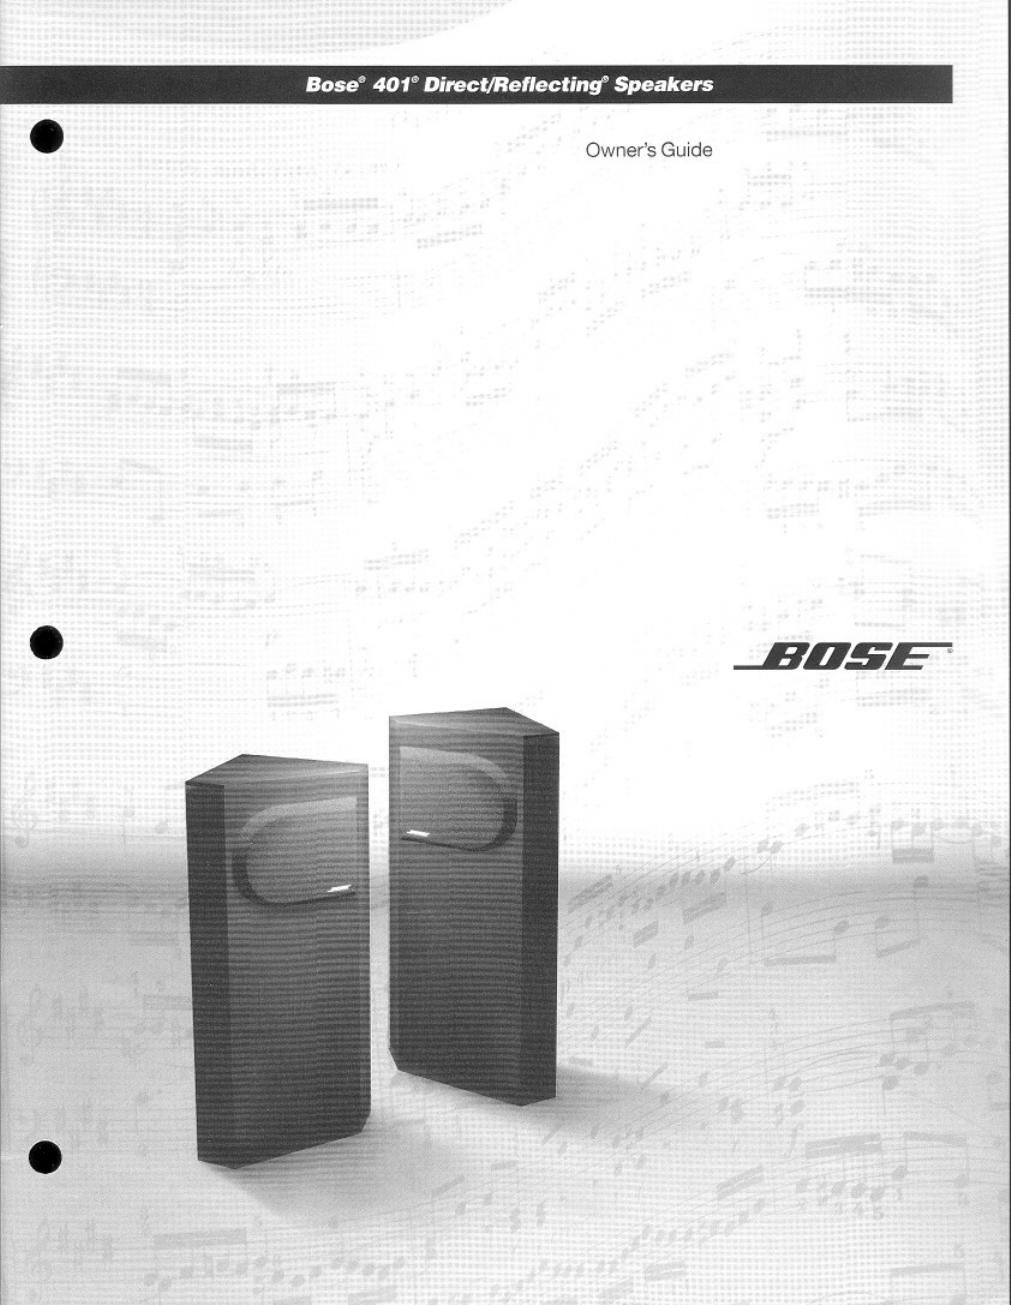 bose 401 owners guide